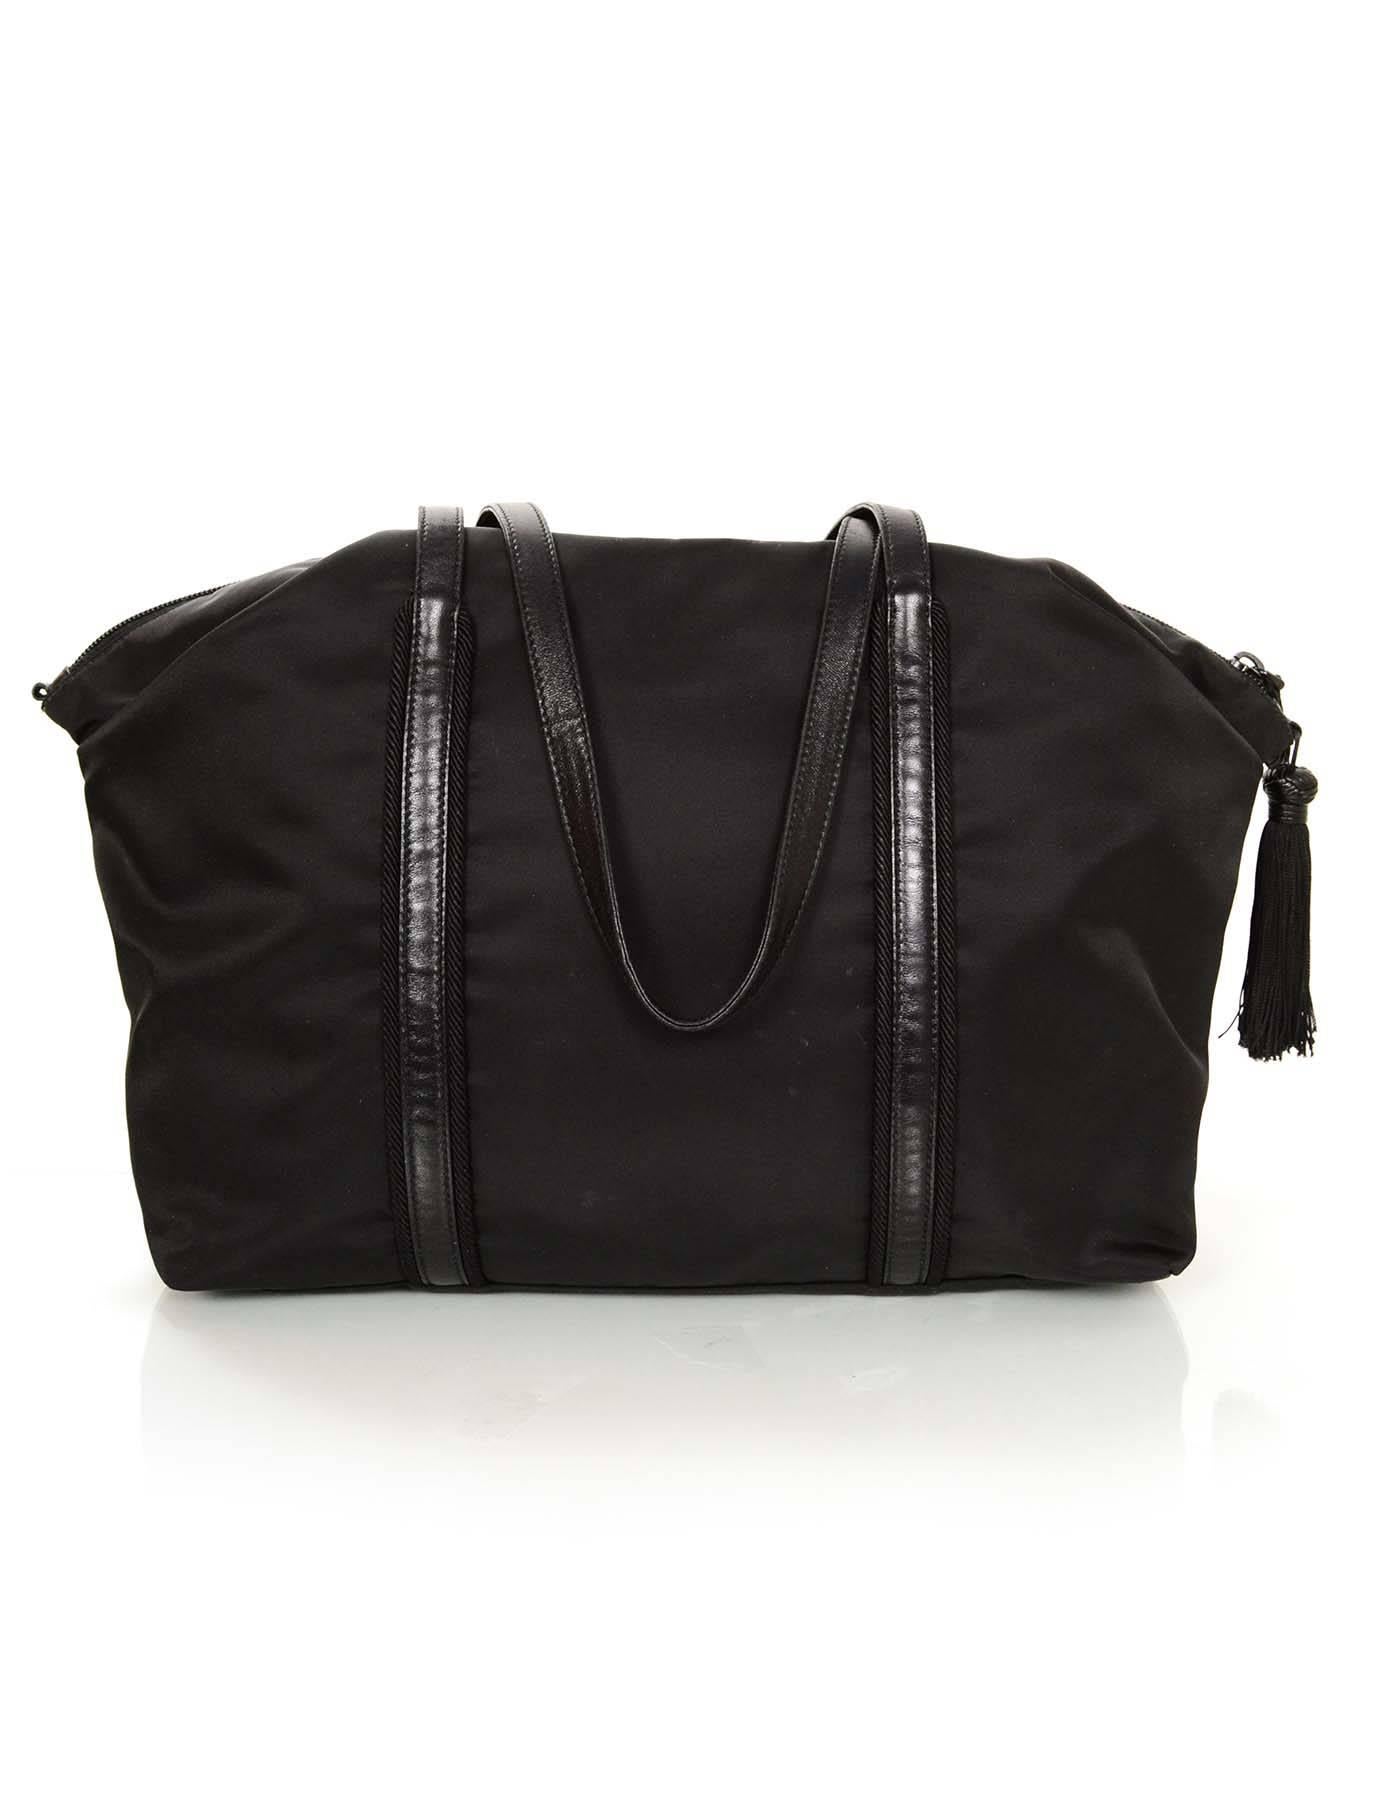 100% Authentic Prada Black Nylon Tassel Duffle Tote Bag 1BG135. Features leather straps and trim and tassel detail.

Made in: Italy
Color: Black
Hardware: Silvertone
Materials: Nylon with canvas and leather trim
Lining: Black monogram